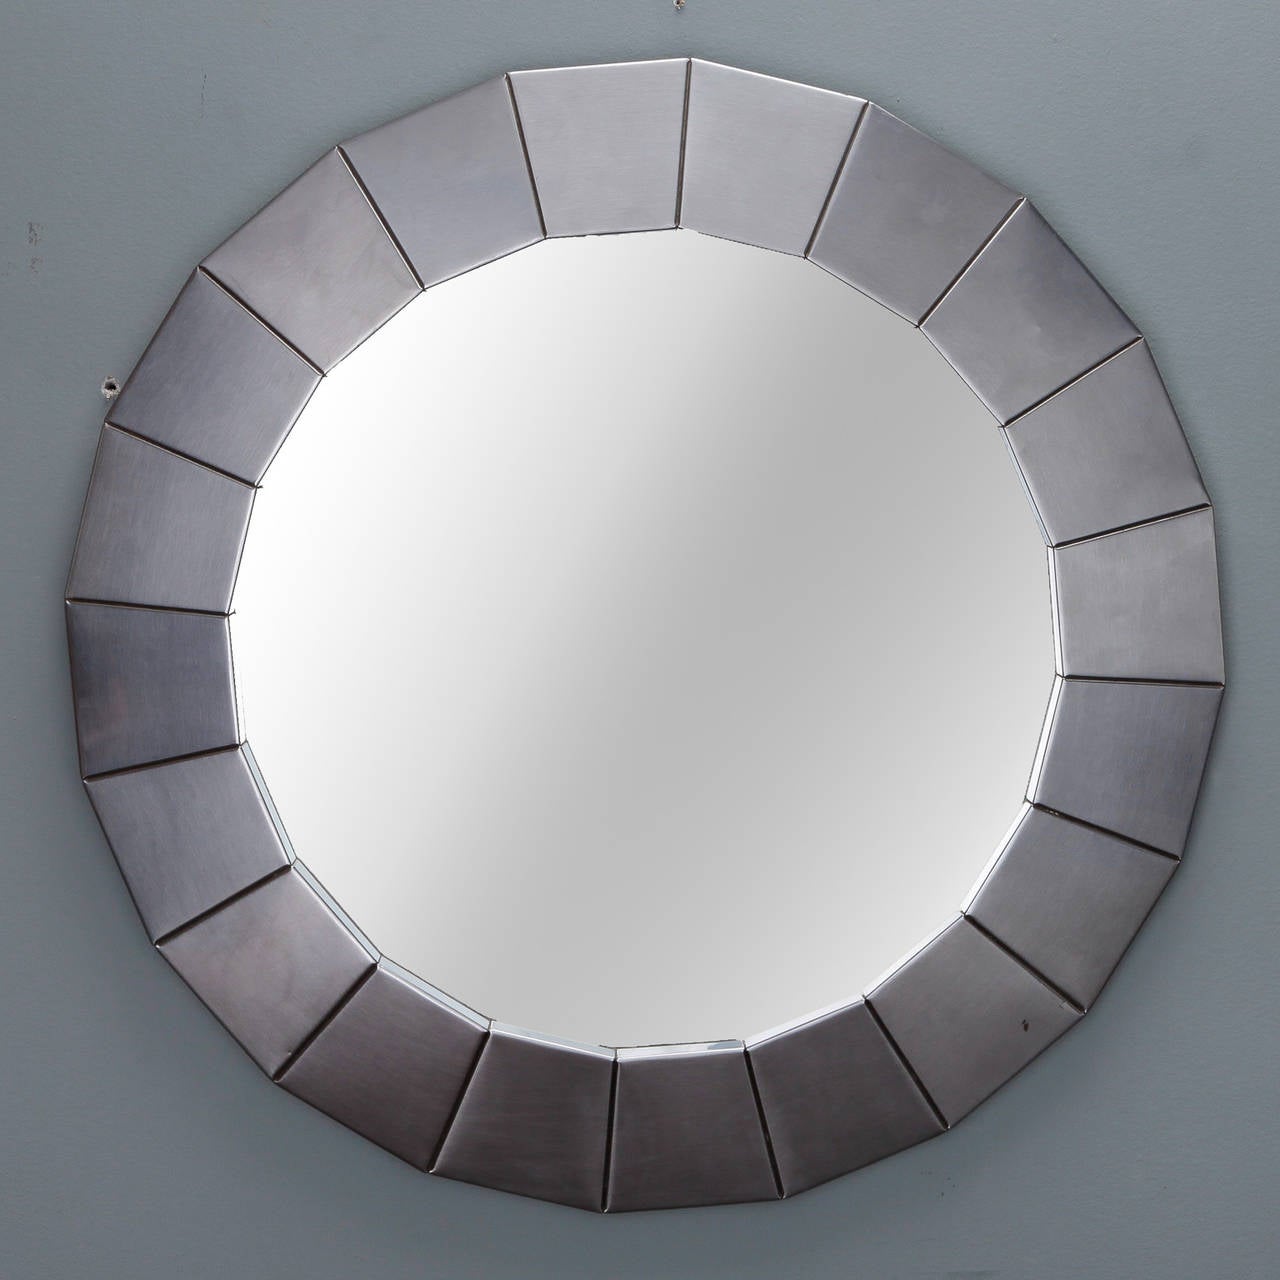 Circa 1960s round mirror with wide frame of silver tone brushed finish metal. 